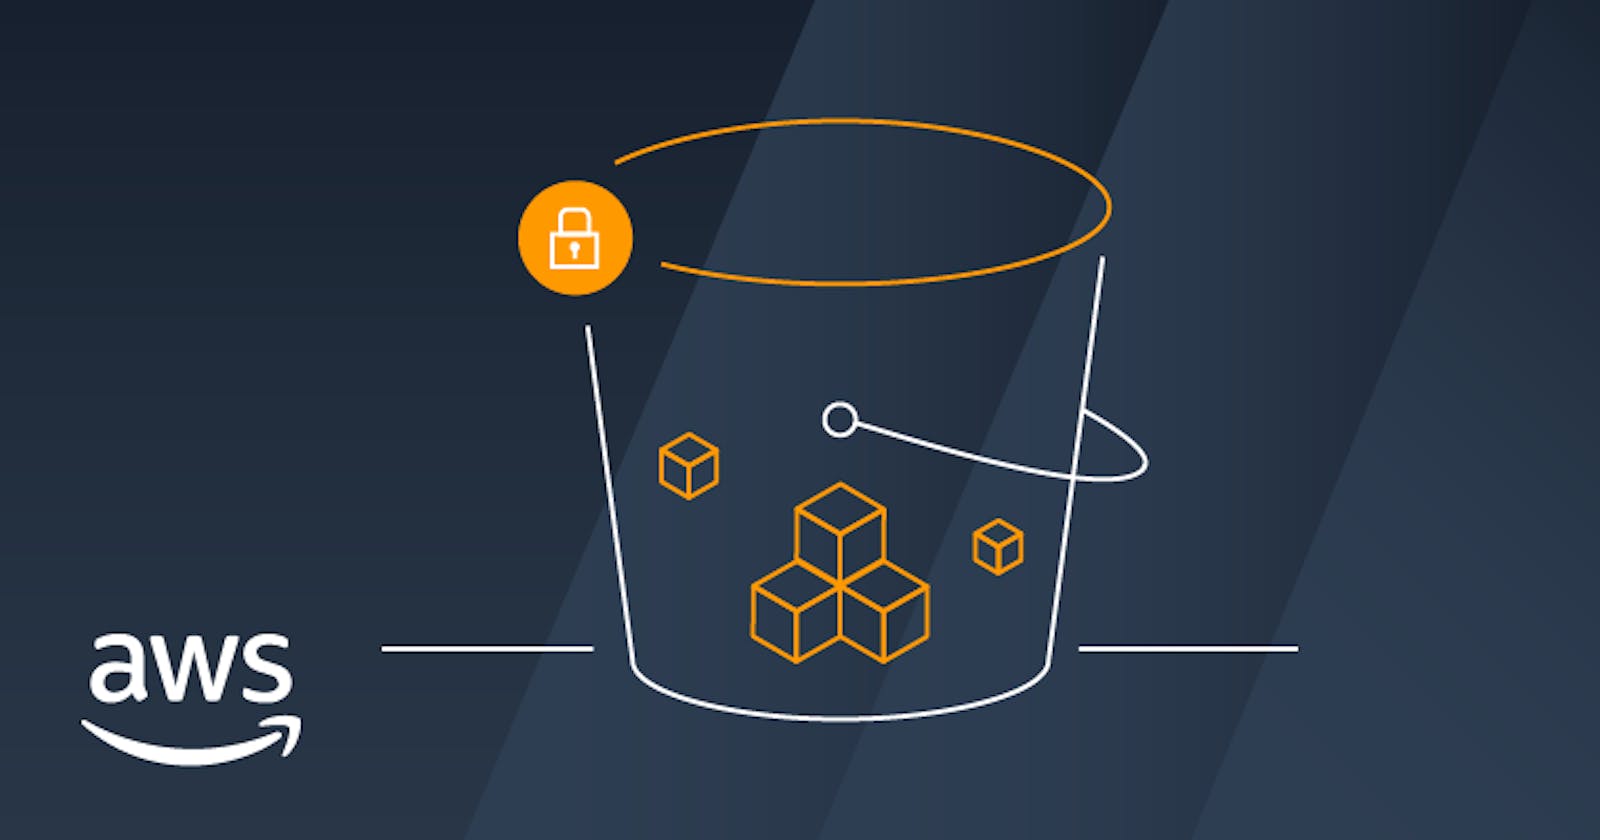 Amazon S3 Simplified: A Beginner's Guide